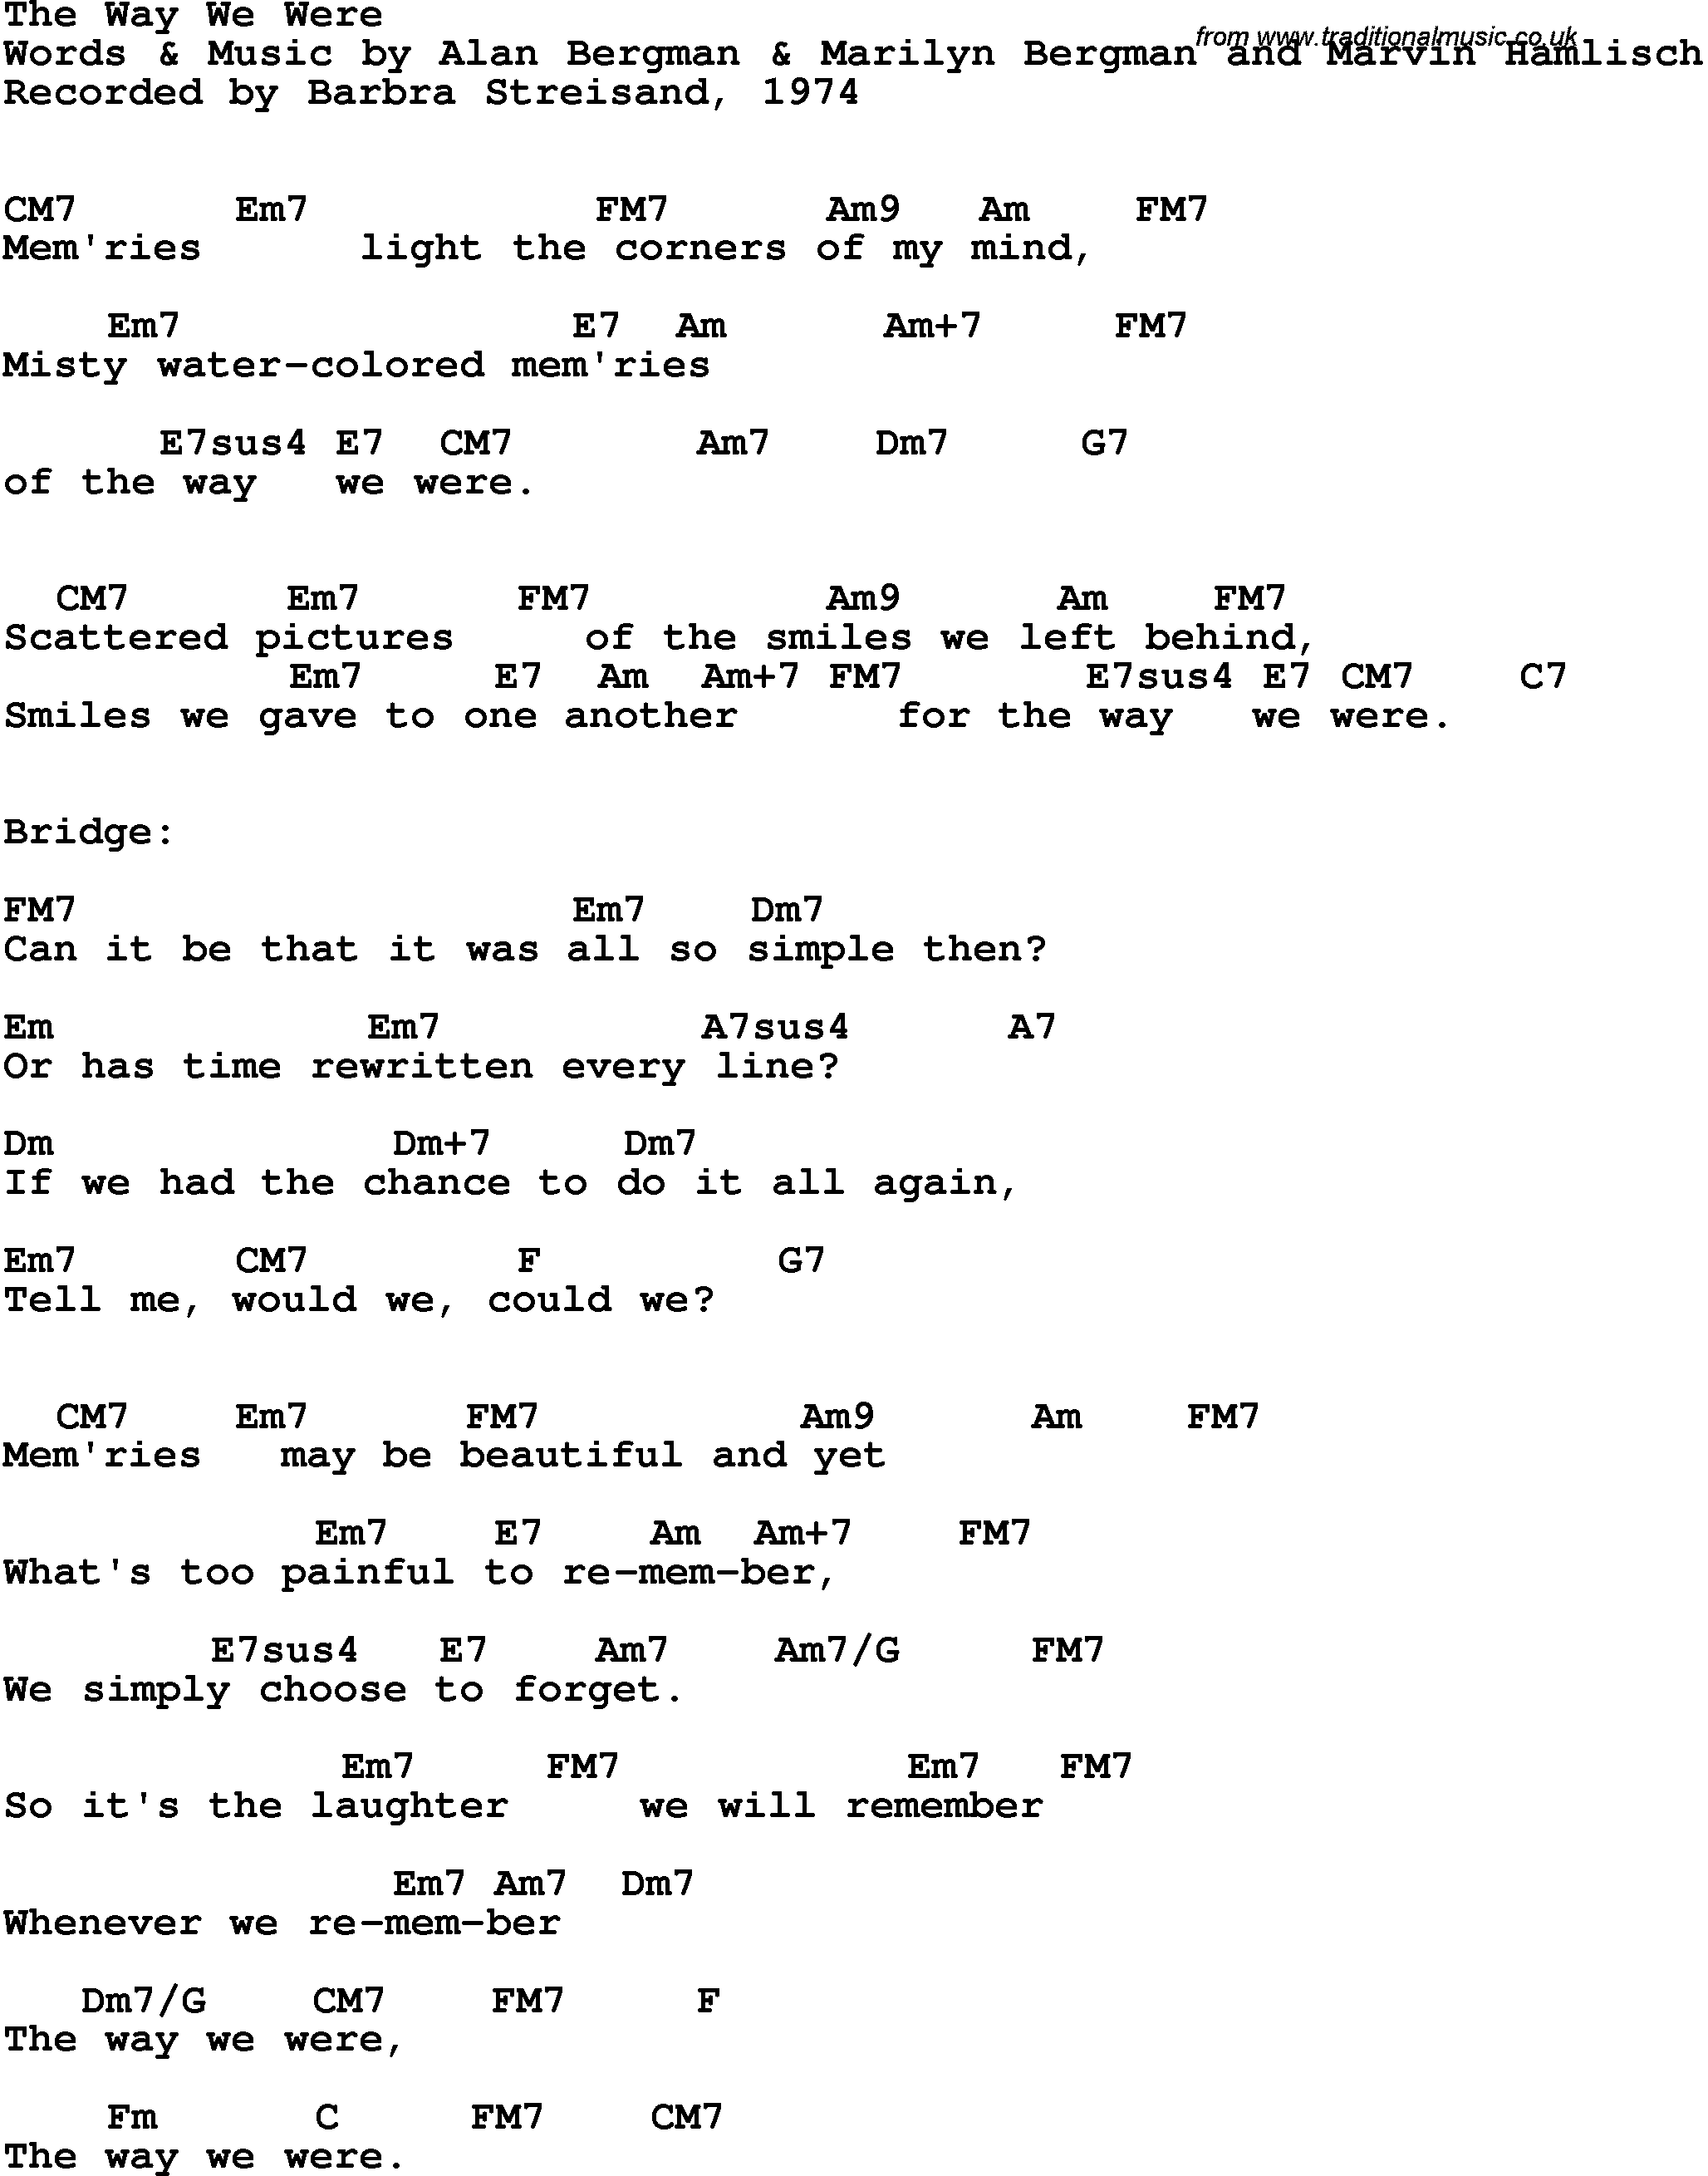 Song Lyrics with guitar chords for Way We Were, The - Barbra Streisand, 1973